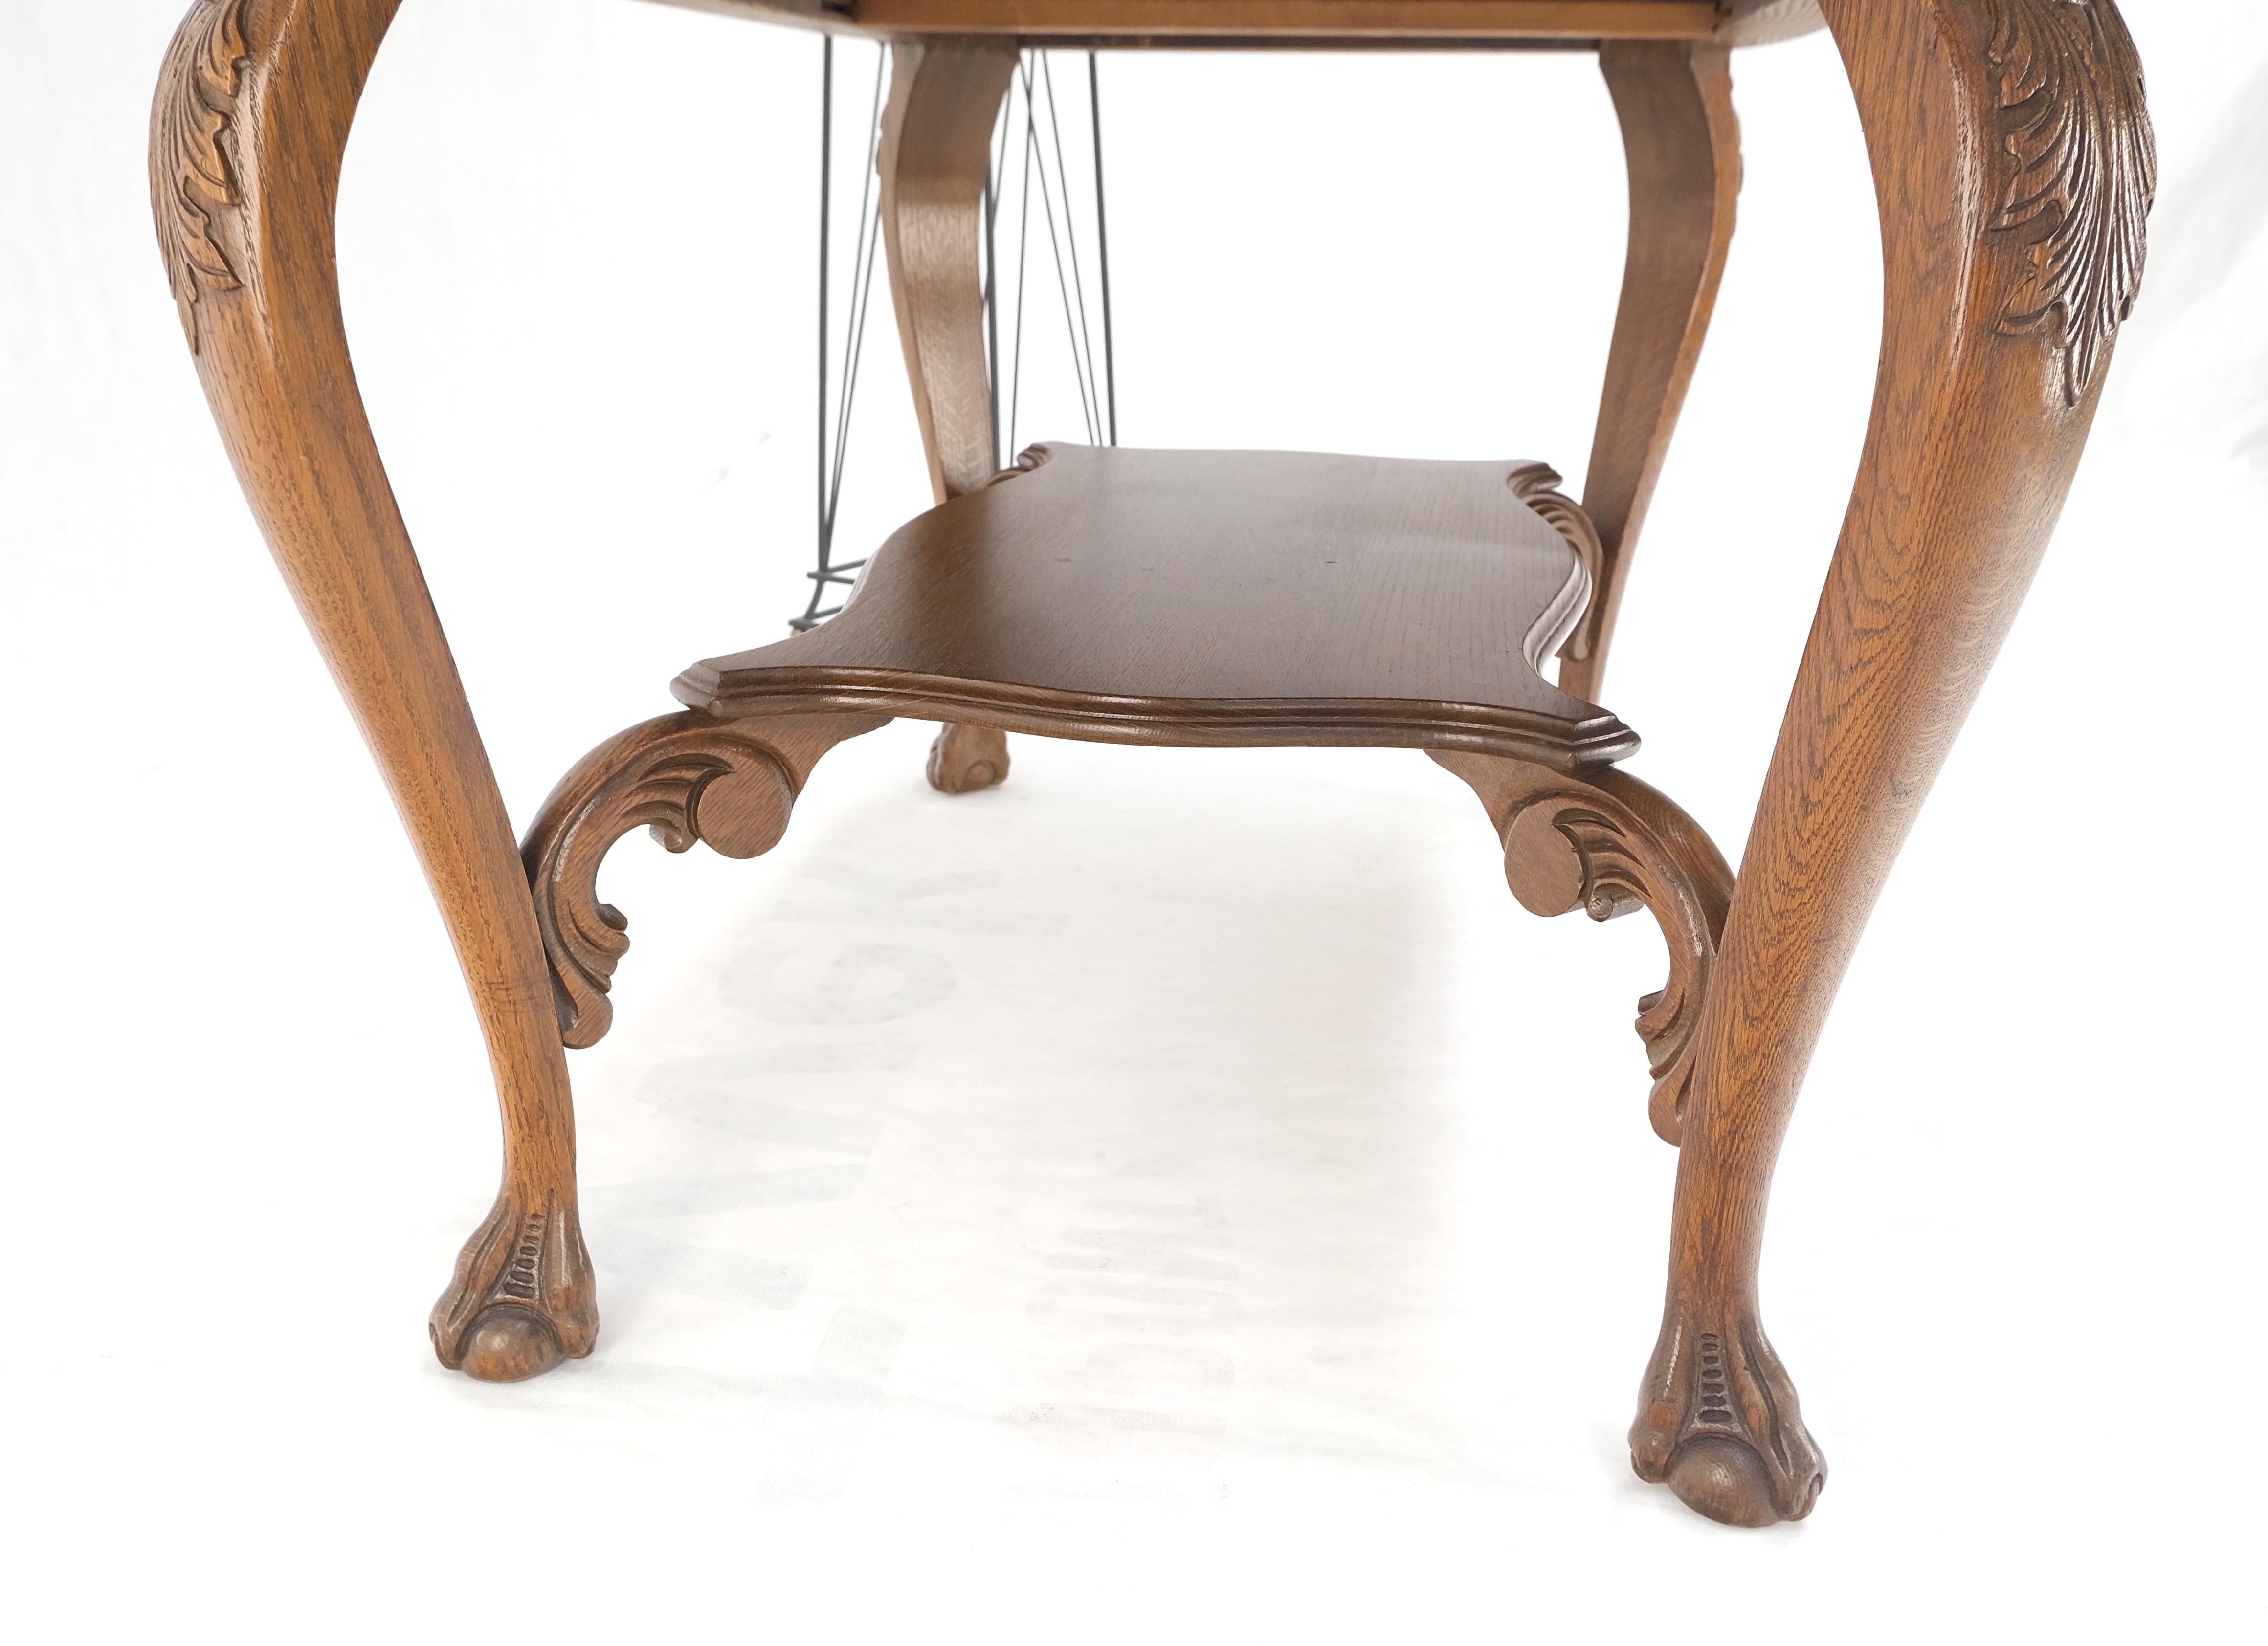 Art Nouveau Style Carved Faces Ball & Claw Feet Rounded Oak Desk Writing Table For Sale 7